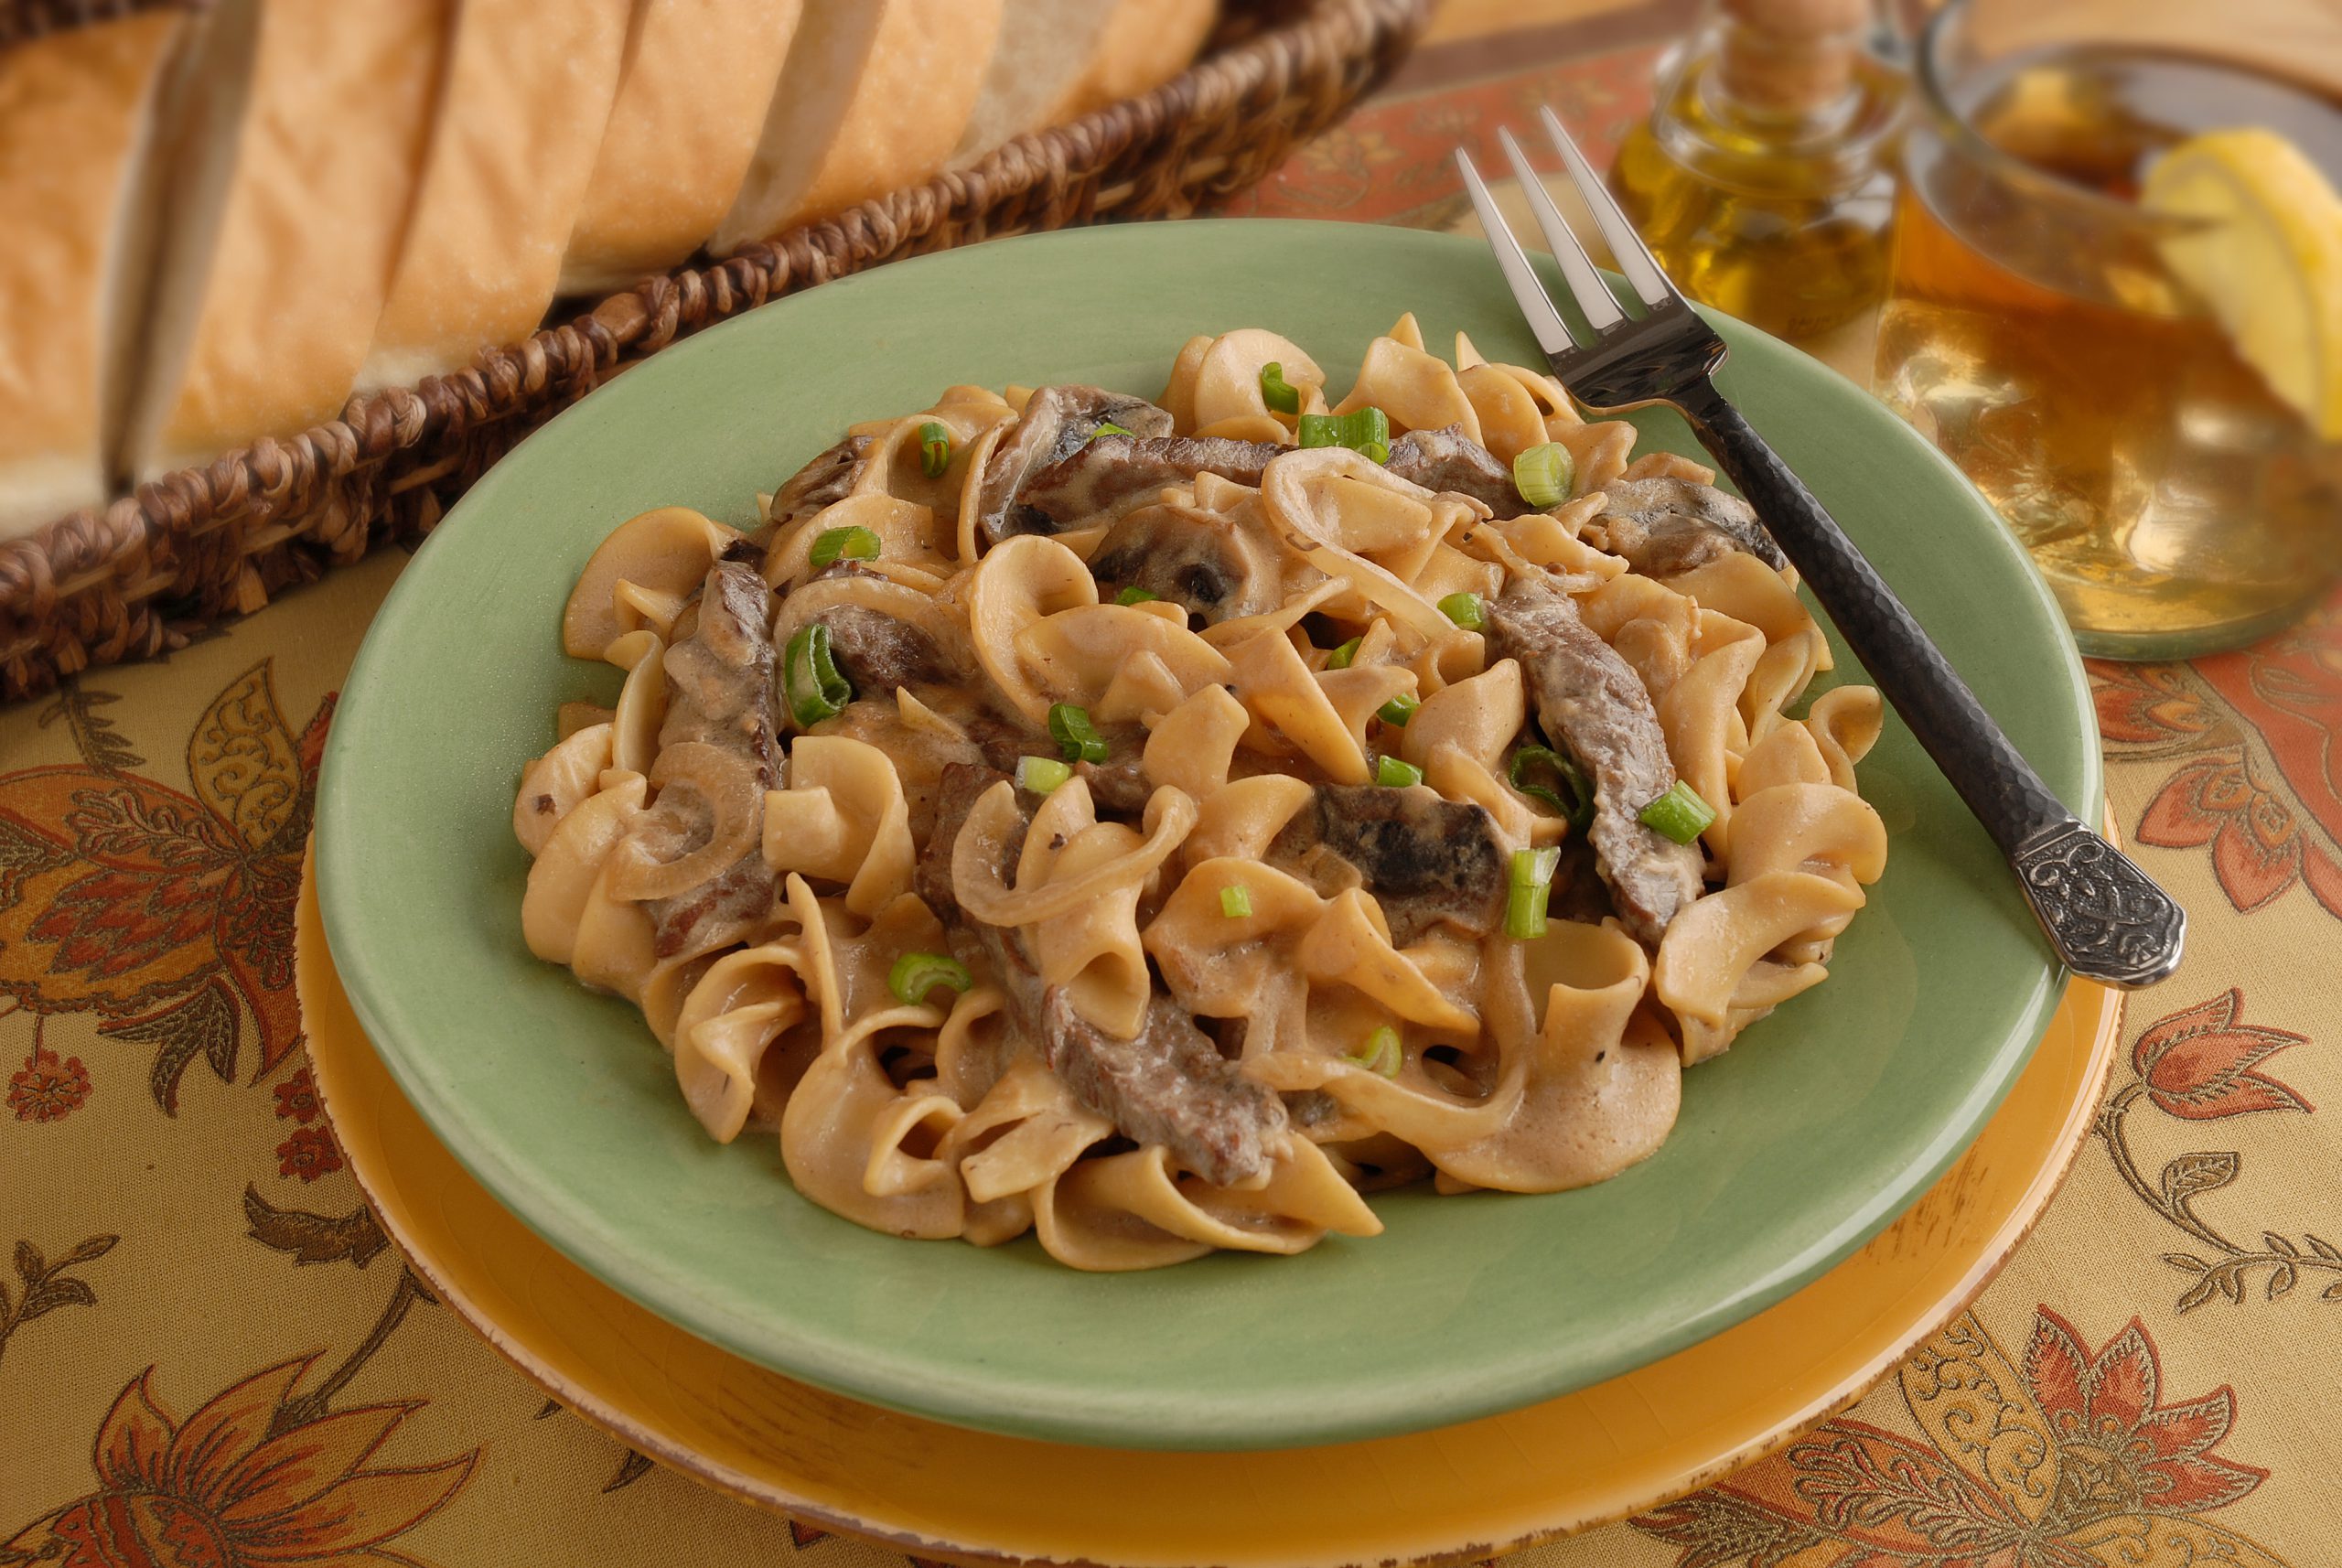 Egg noodles, beef, onions, and mushrooms in a light sauce, topped with fresh green onion